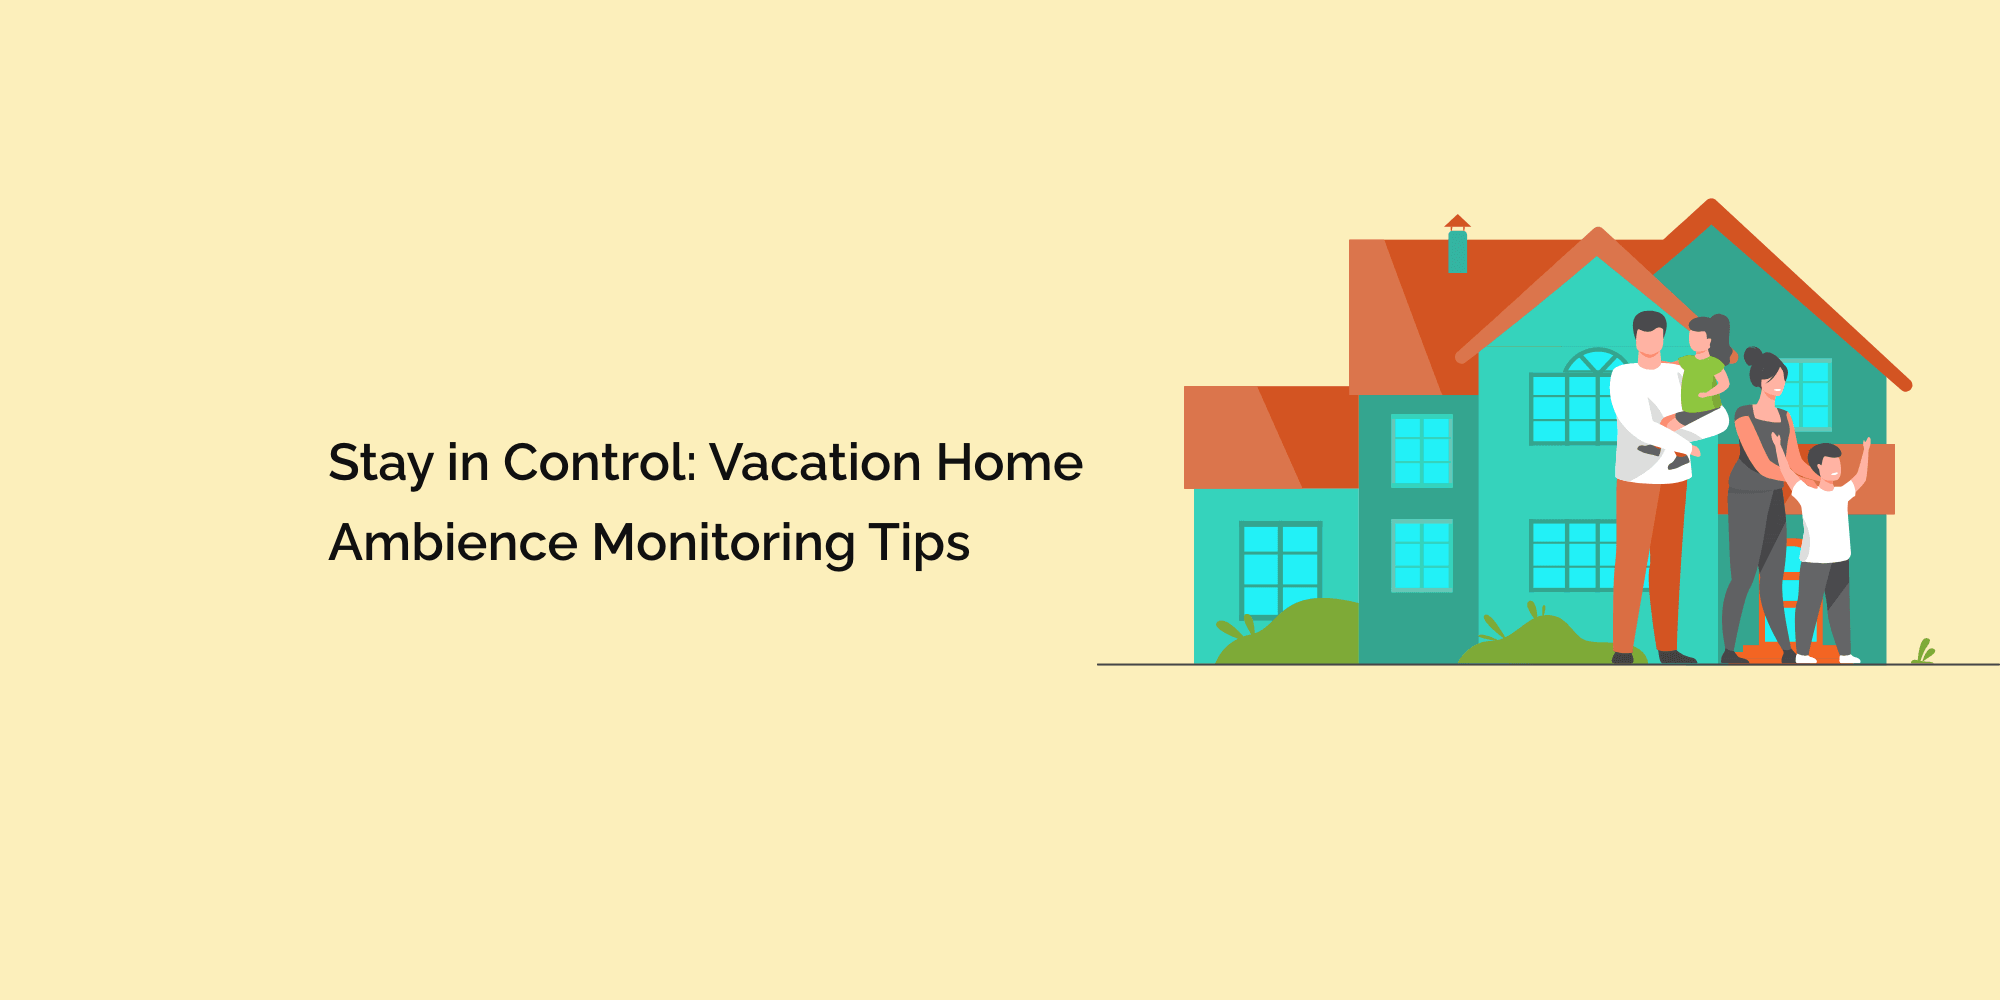 Stay in Control: Vacation Home Ambience Monitoring Tips